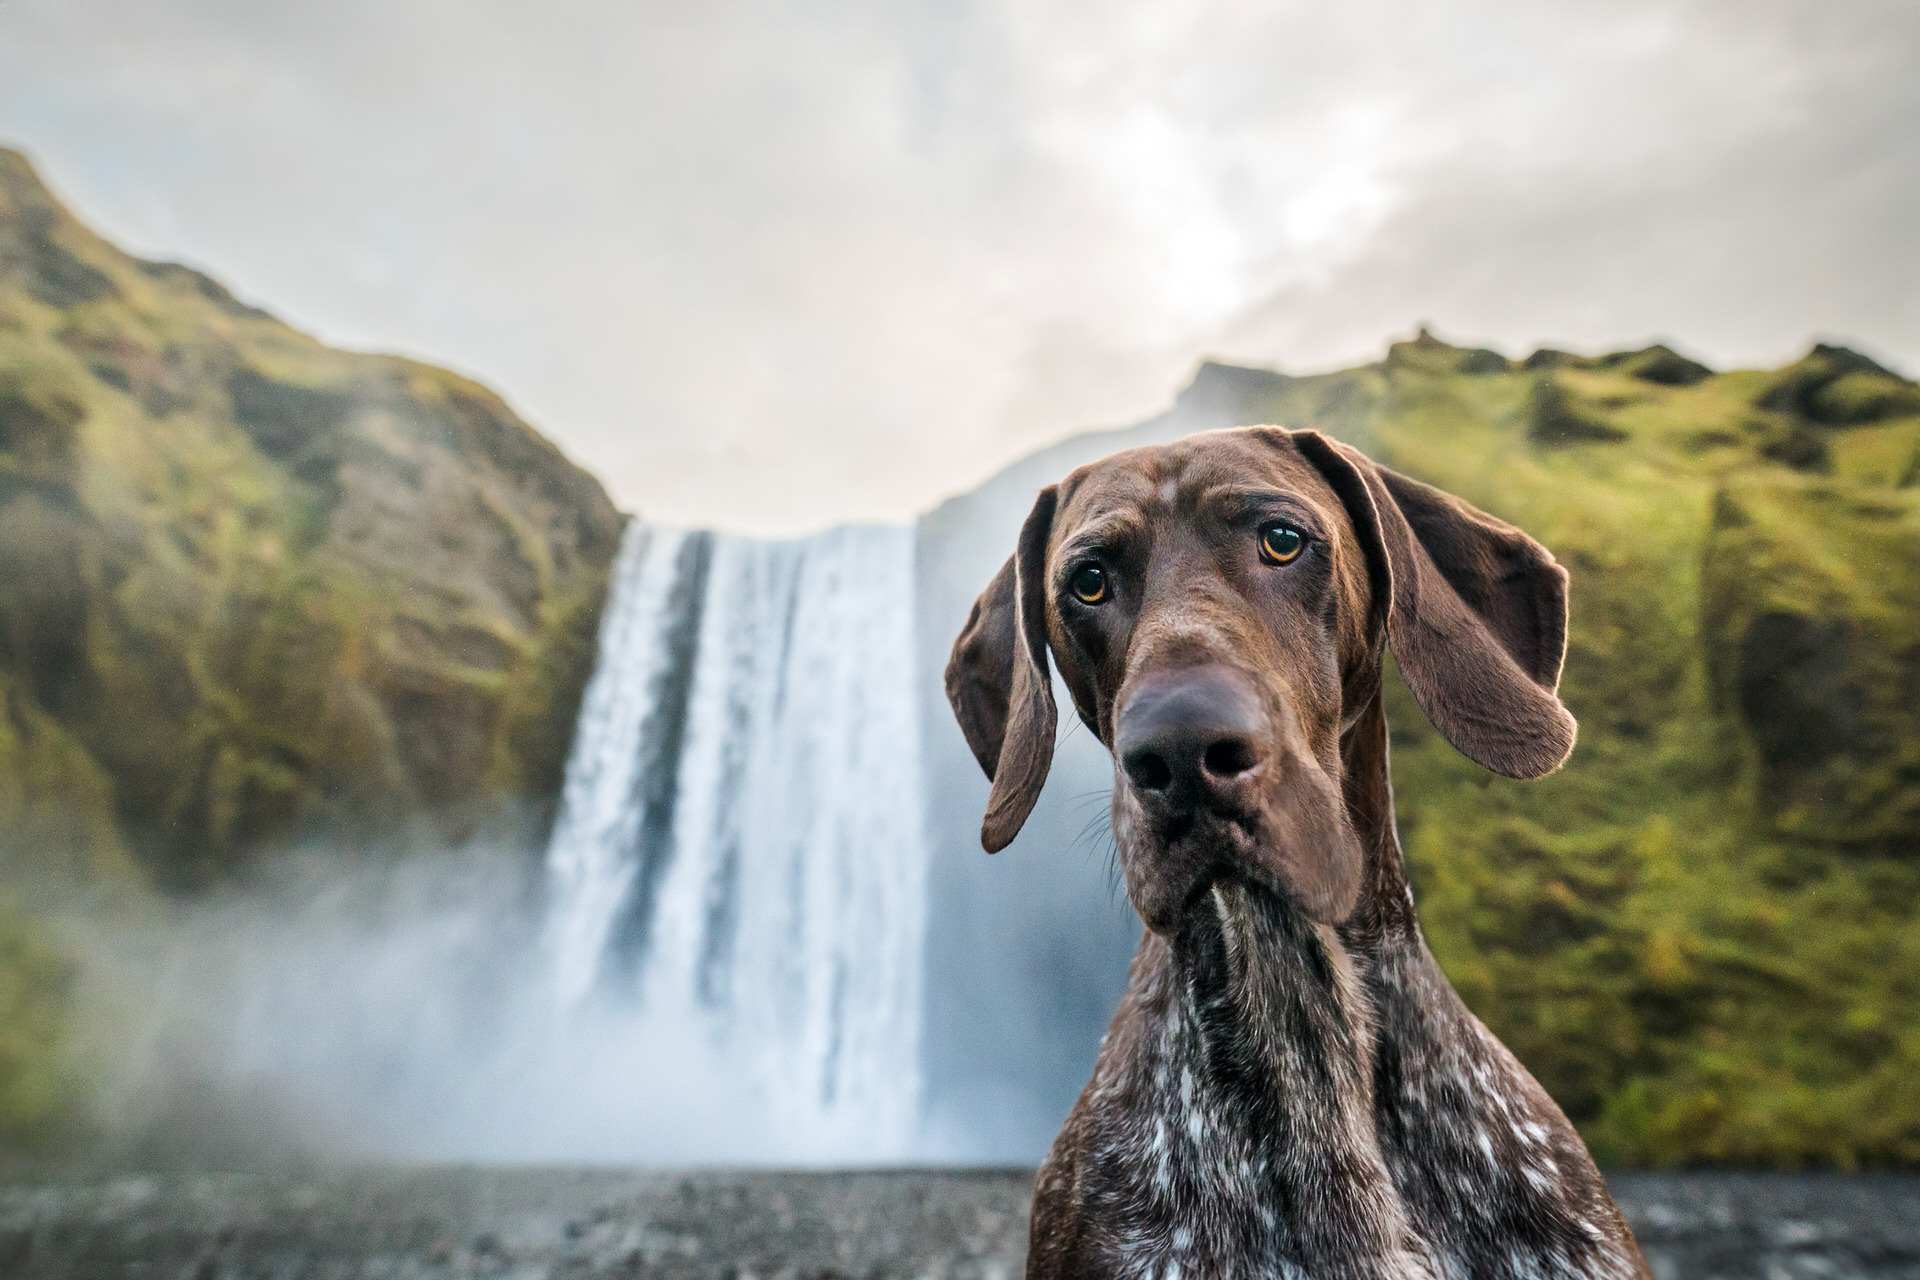 Dog in front of a scenic waterfall at Skógafoss in Iceland